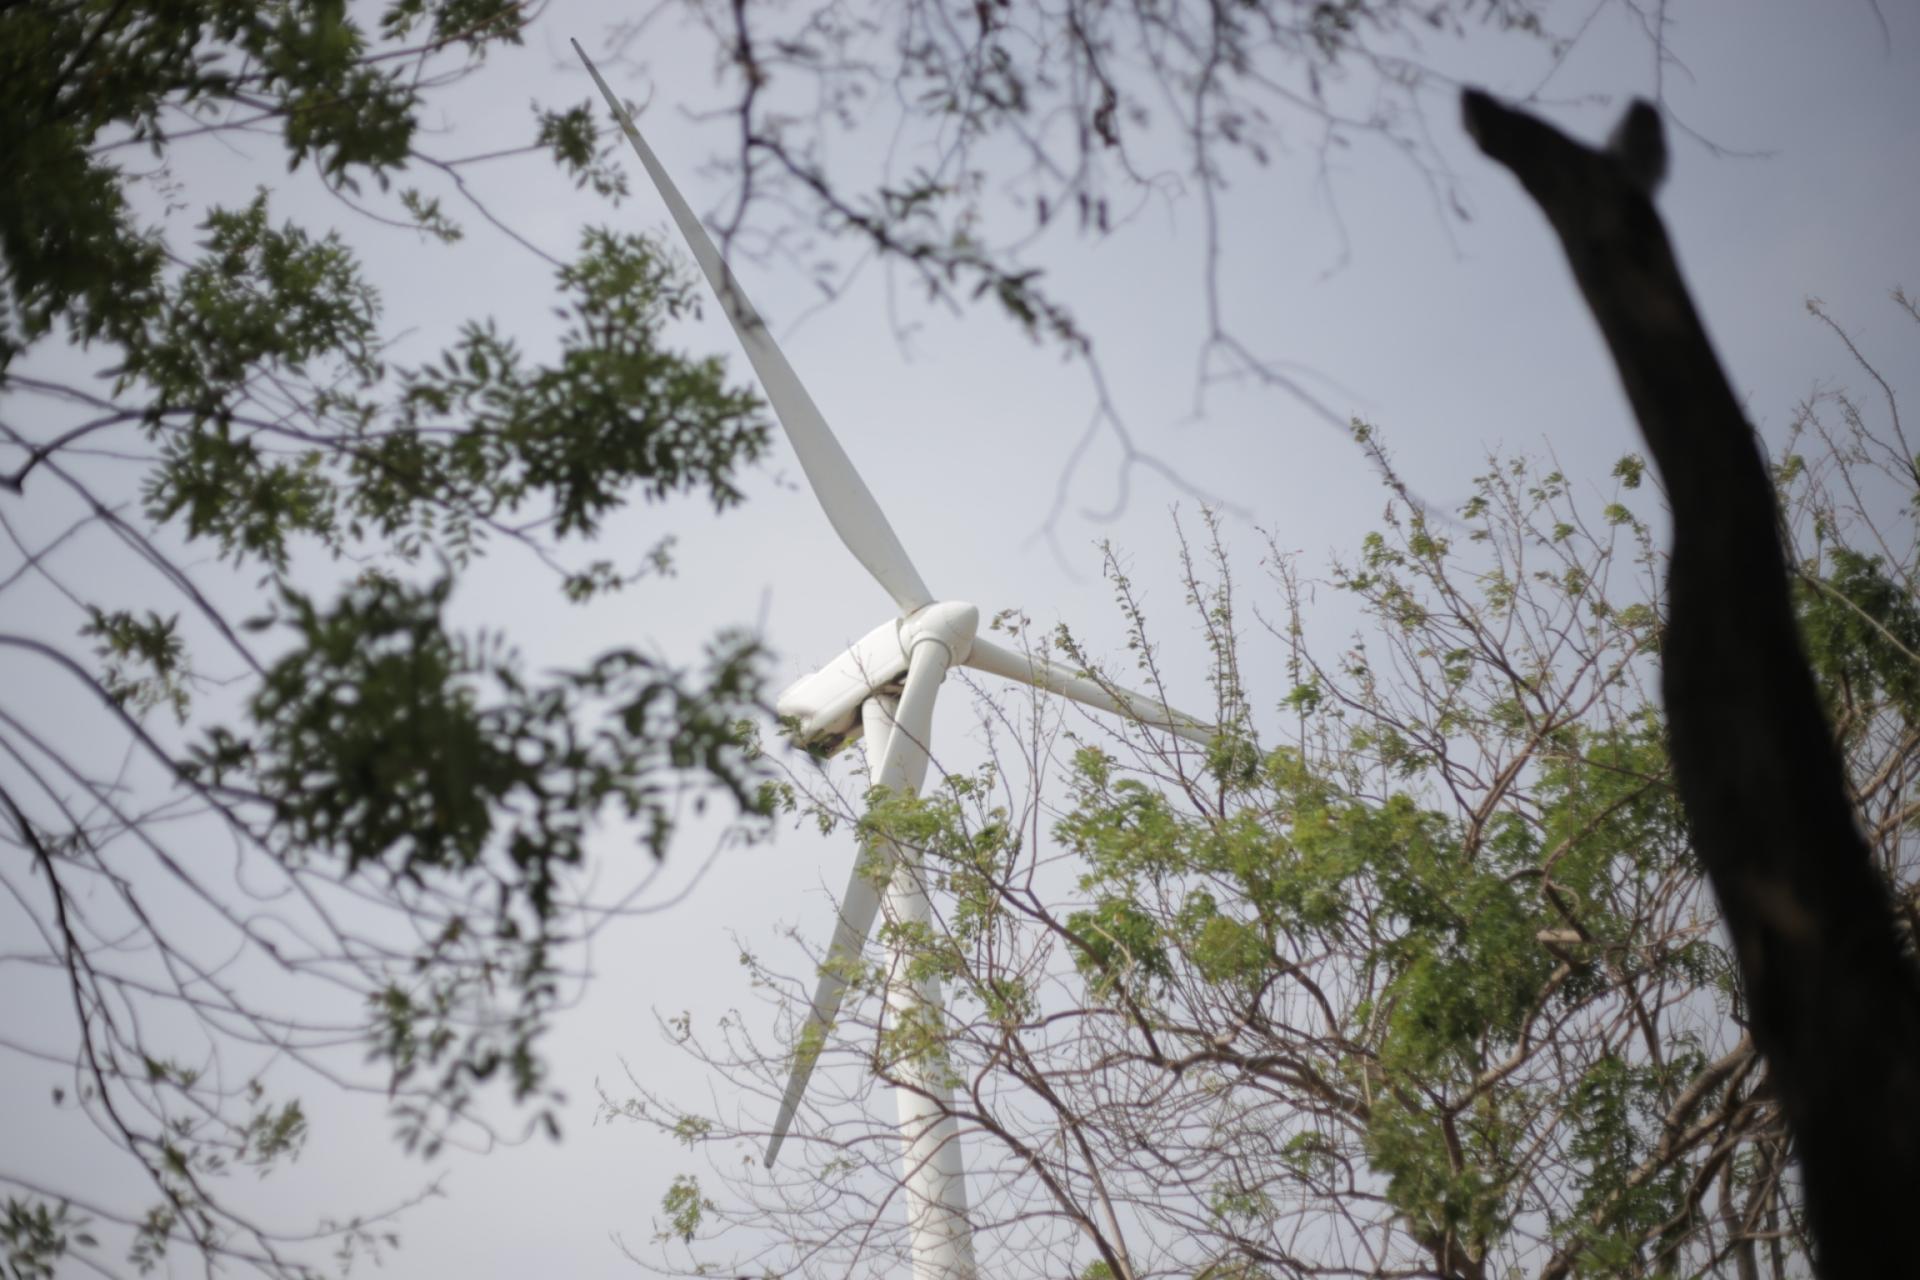 A wind generator near the town of Juchitán de Zaragoza, Mexico, which is along the Interoceanic Corridor, a signature project of President Andrés Manuel López Obrador.